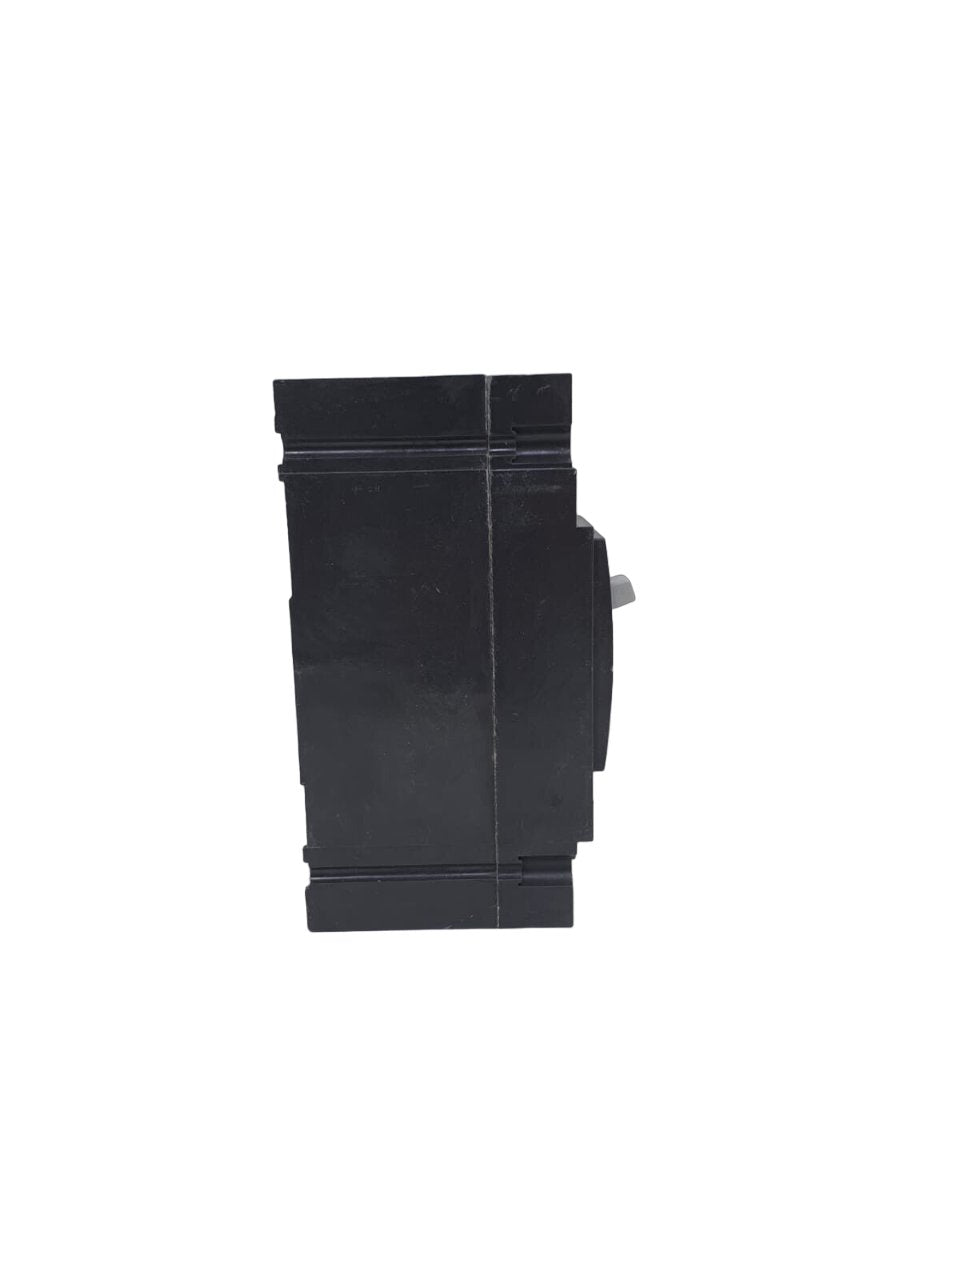 THED114020WL - General Electrics - Molded Case Circuit Breakers